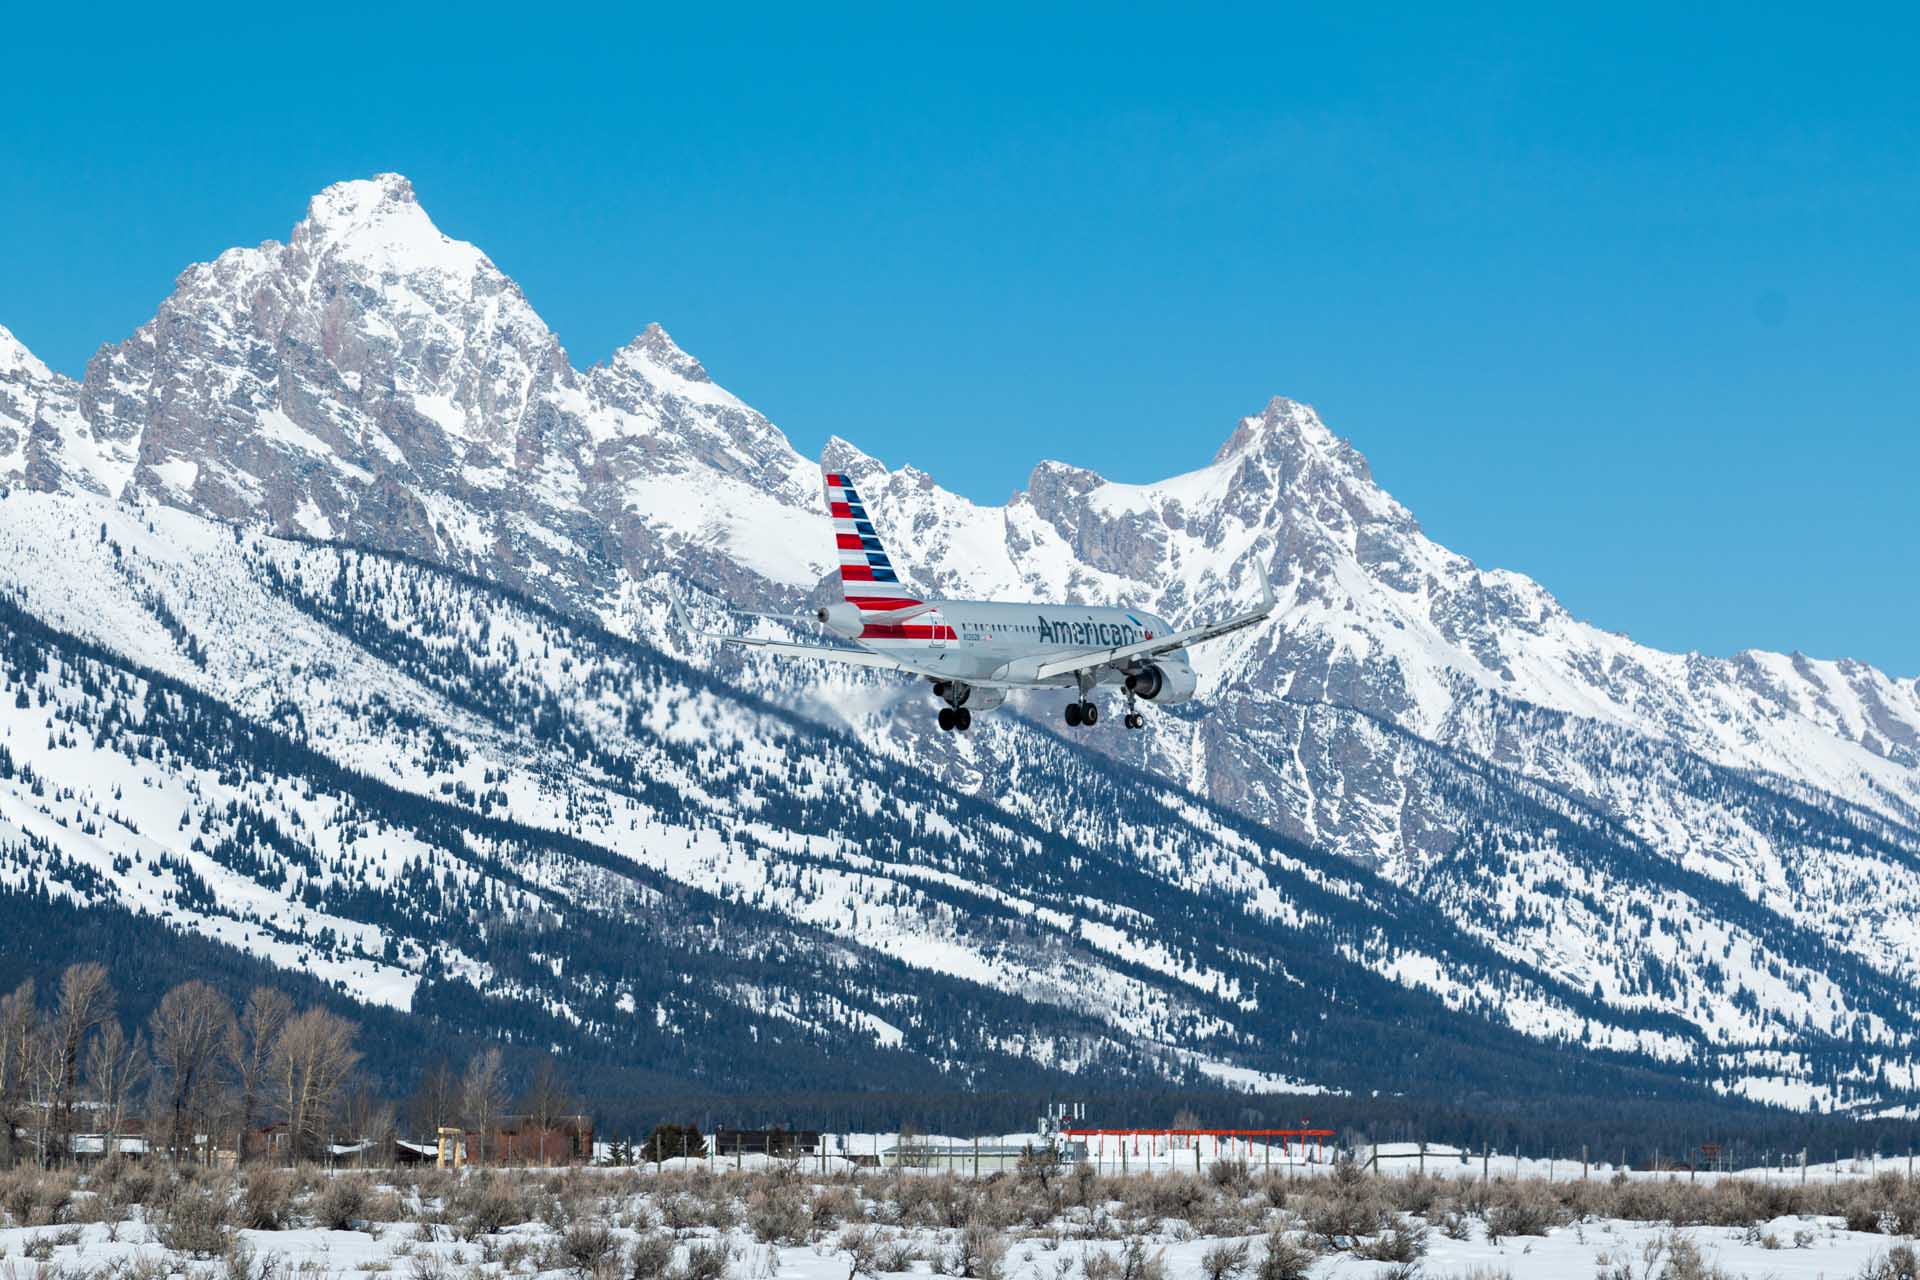 Fly Jackson Hole - Jackson Hole Air- Jackson Hole Mountain Resort. You think Jackson Hole is only for Extreme Skiers? Think again!